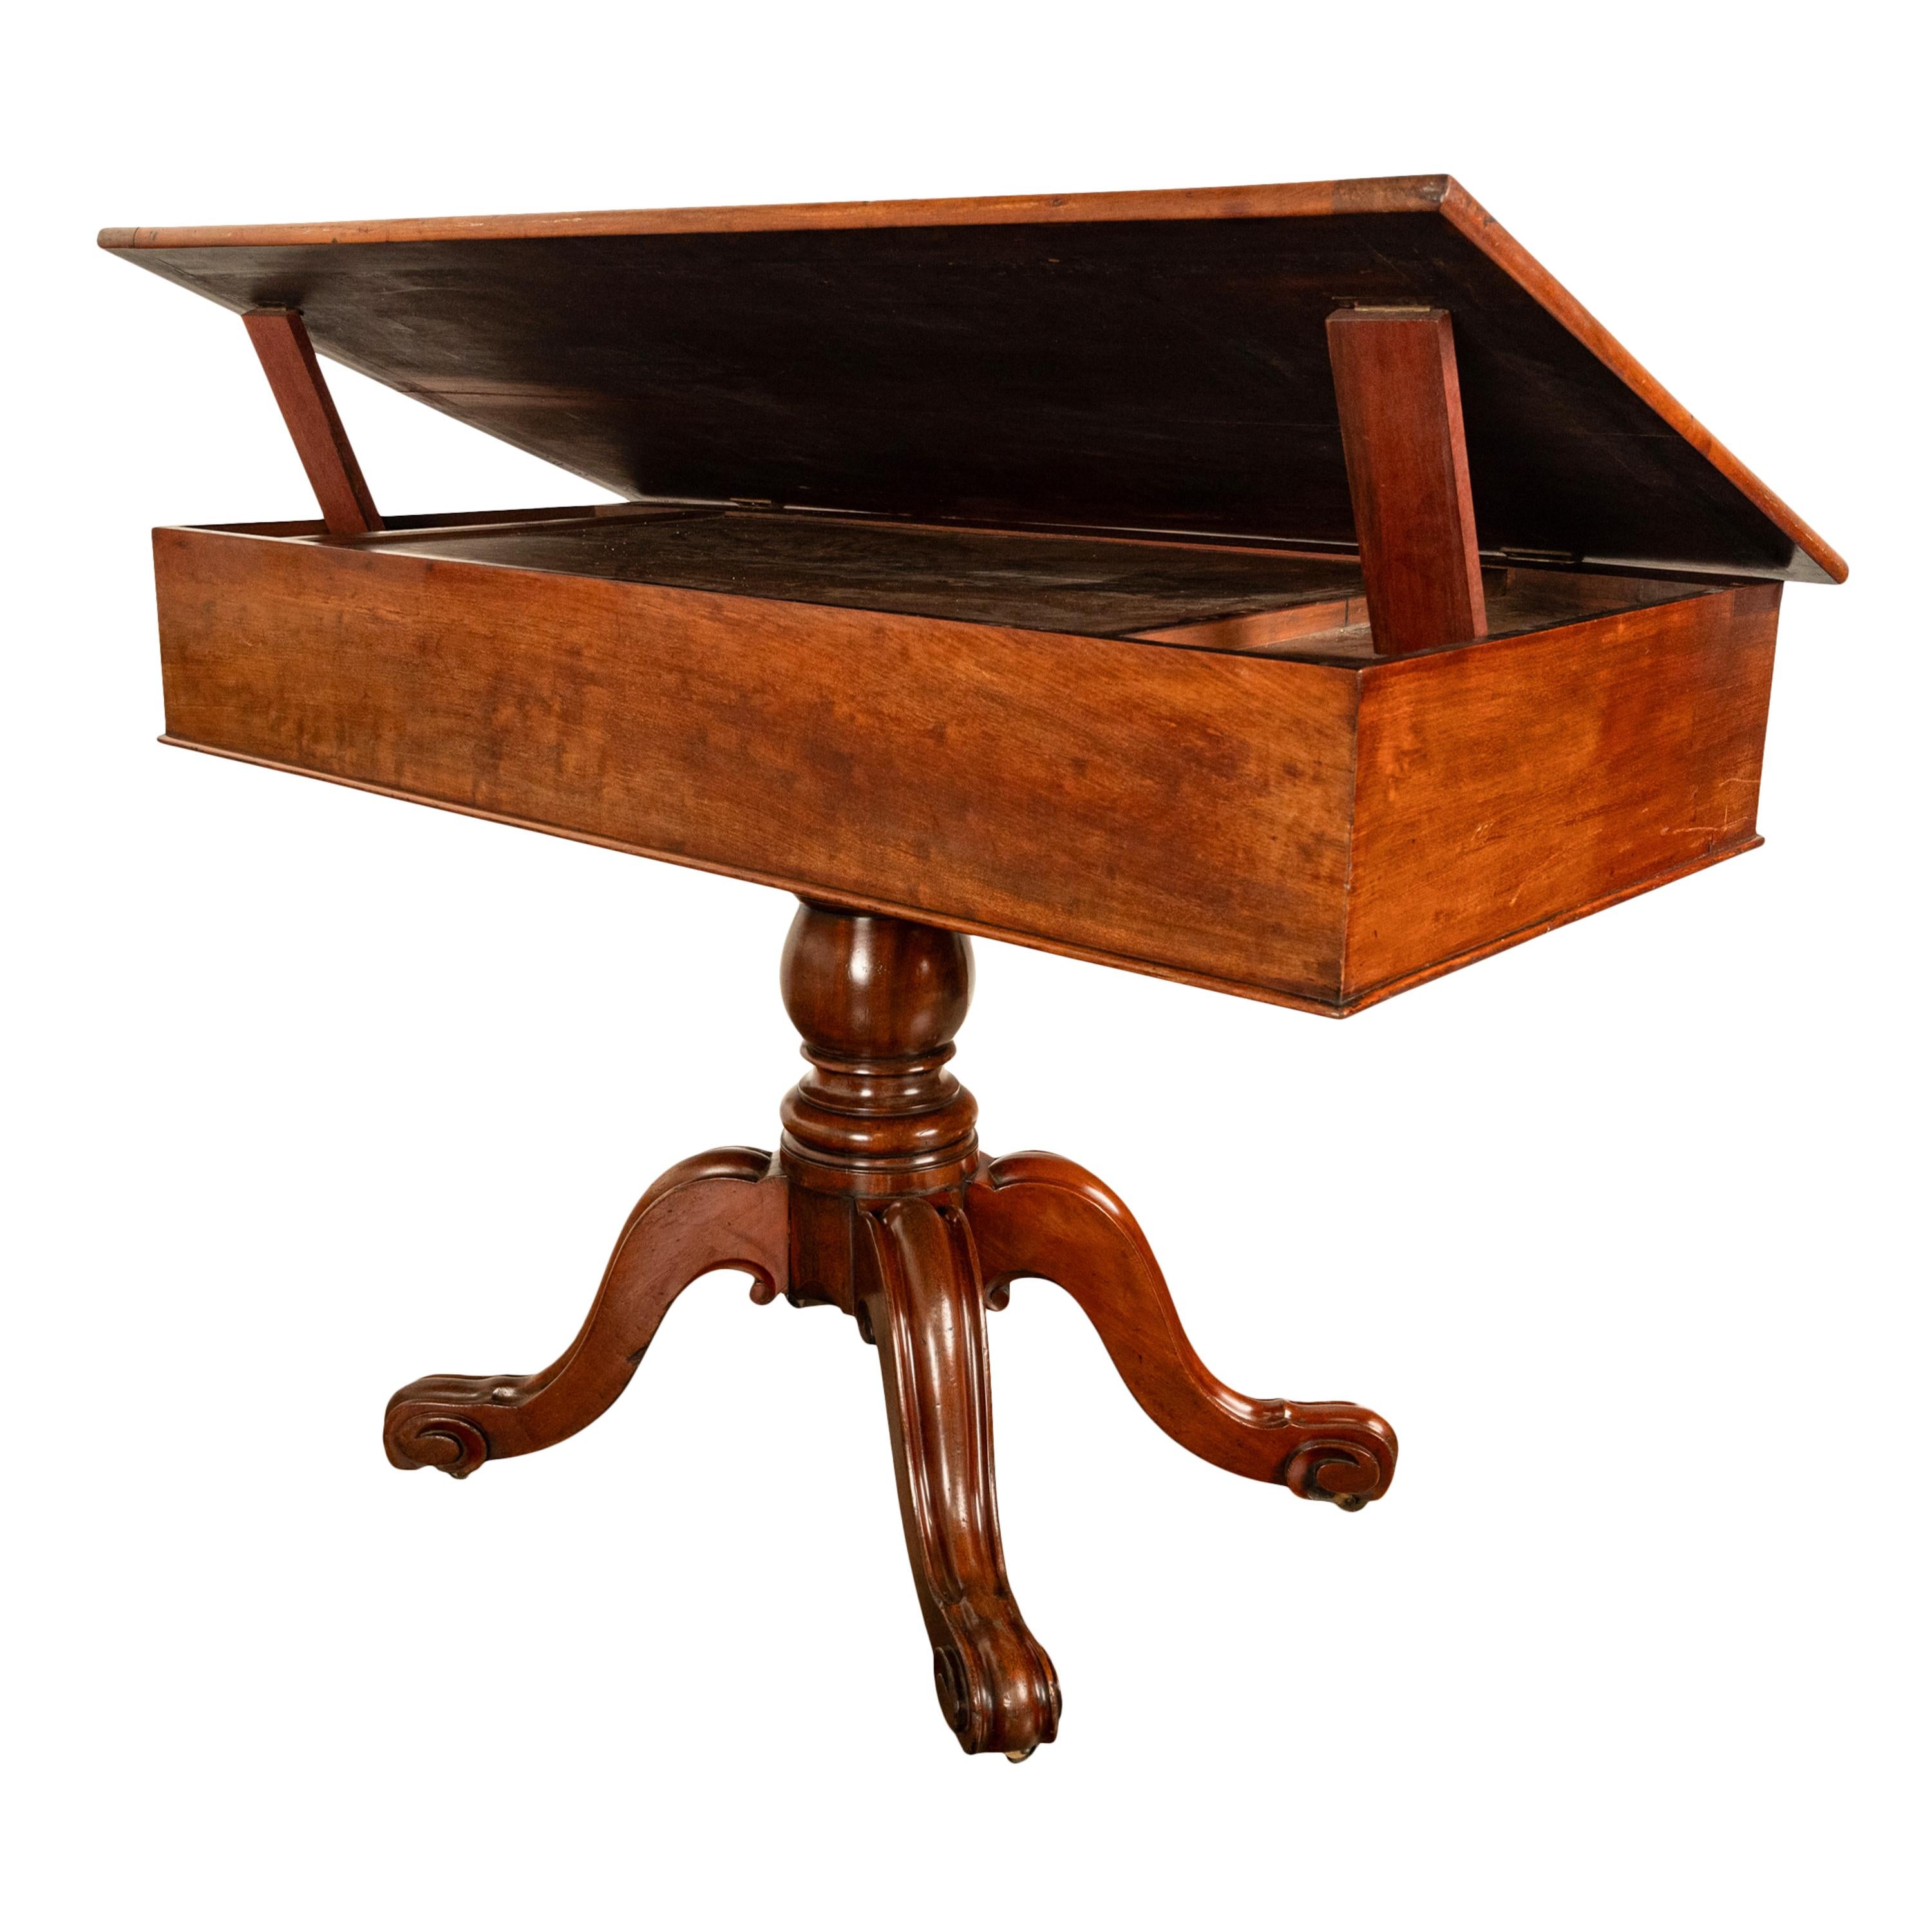 Antique 19th Century Architect's Mahogany Pedestal Desk Drafting Table 1870 For Sale 3